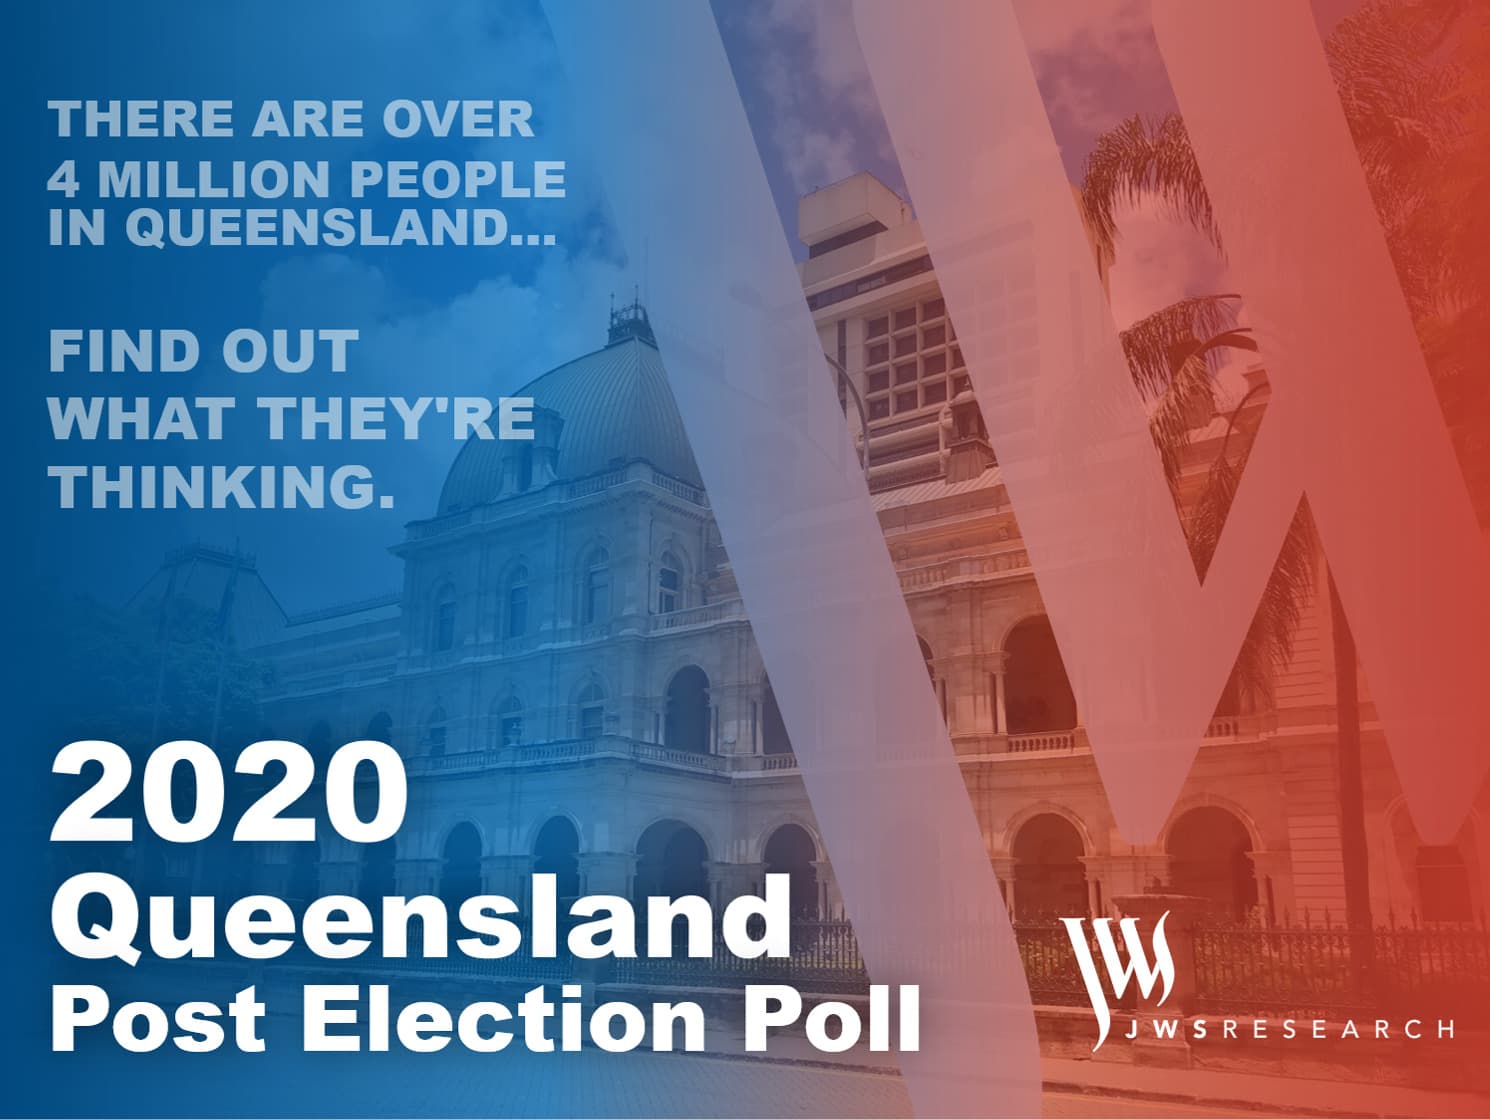 Queensland postelection survey shows detail behind Saturday's results